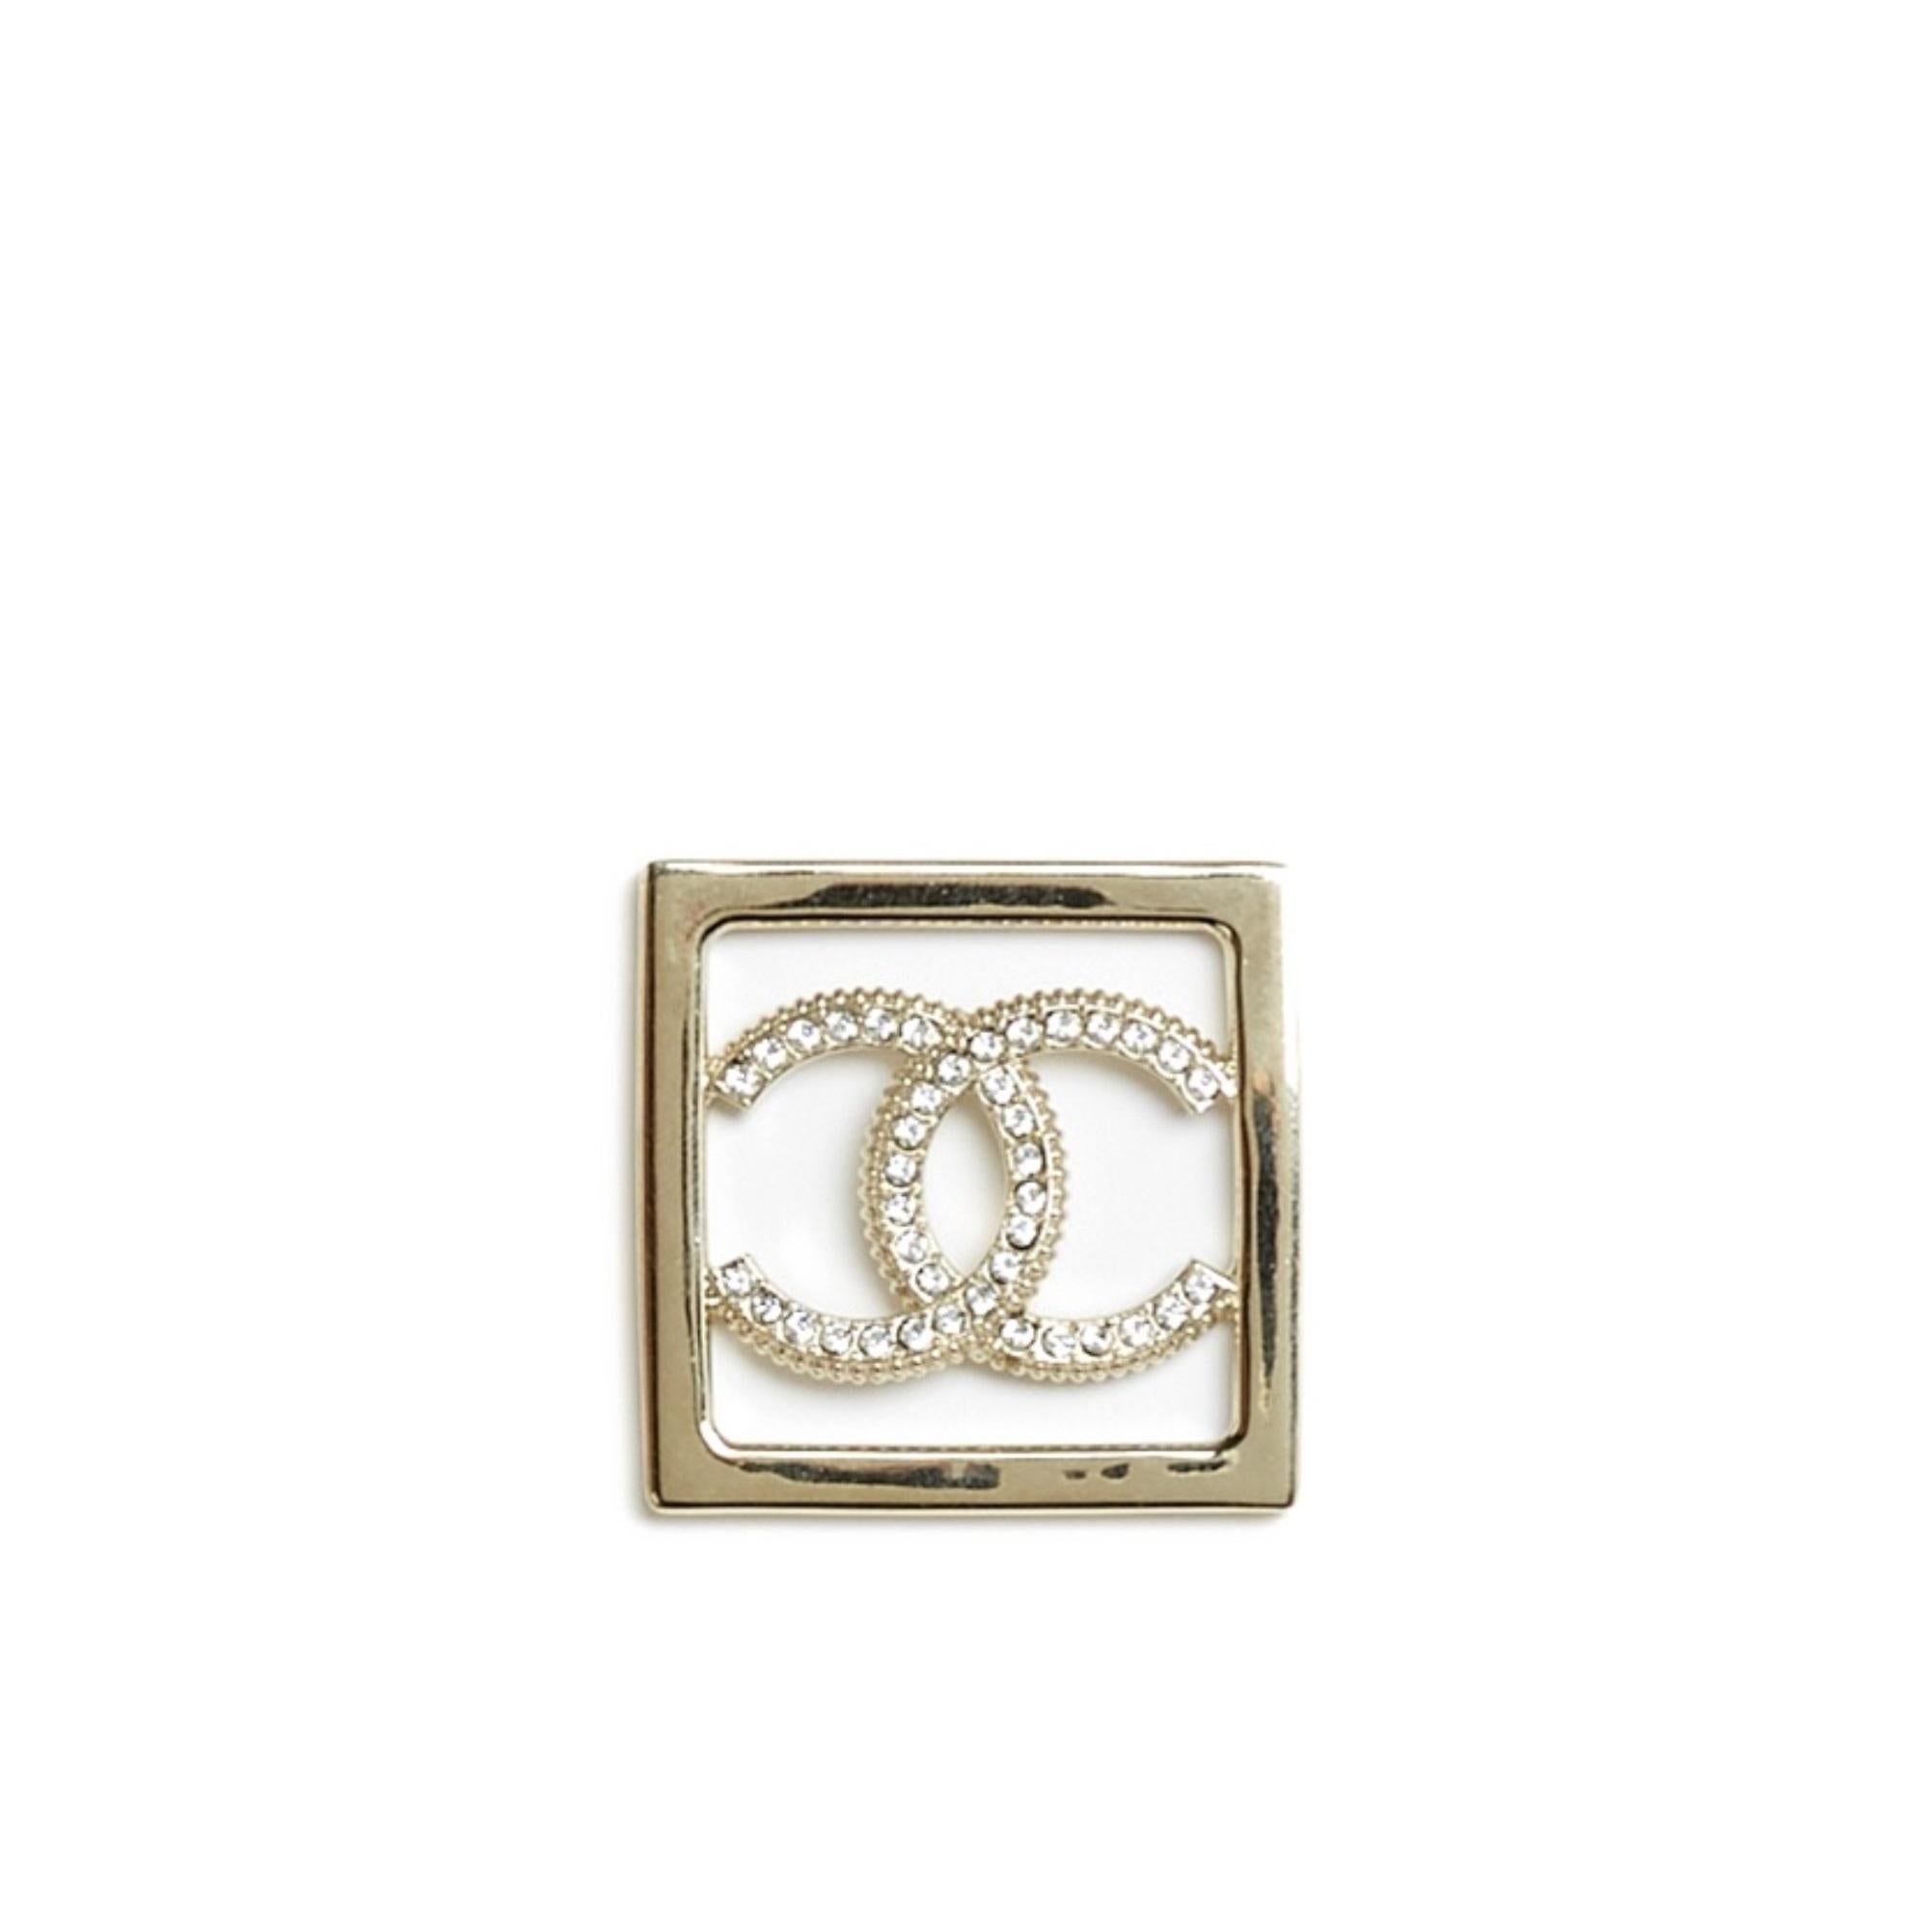 Chanel stud earrings in lightly gold-plated metal, with the motif of a square surrounding the CC symbol paved with small white rhinestones. Width 4.05 cm x height 4.05 cm. The earrings are delivered without invoice or original packaging but they are